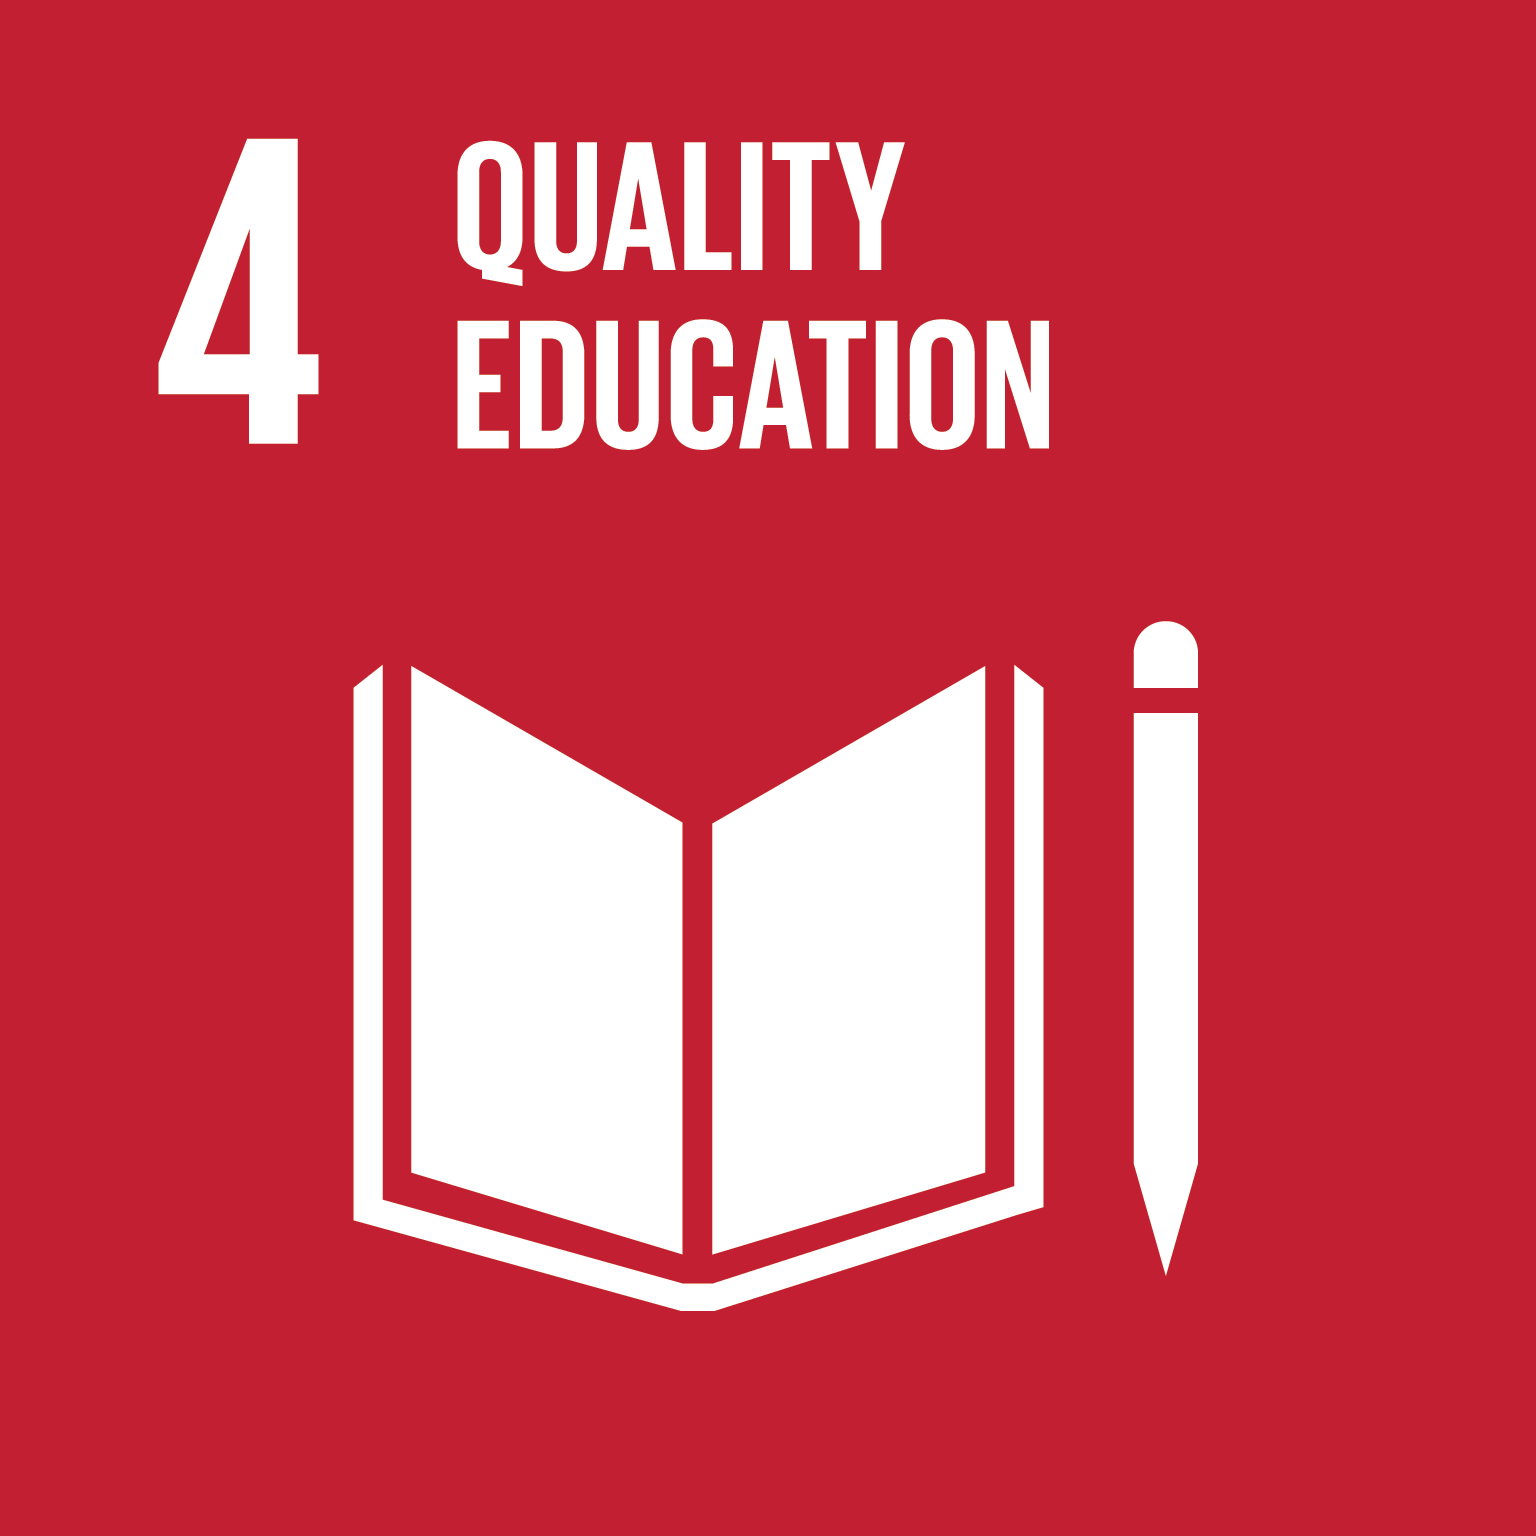 Universal Access to Quality Tertiary Education